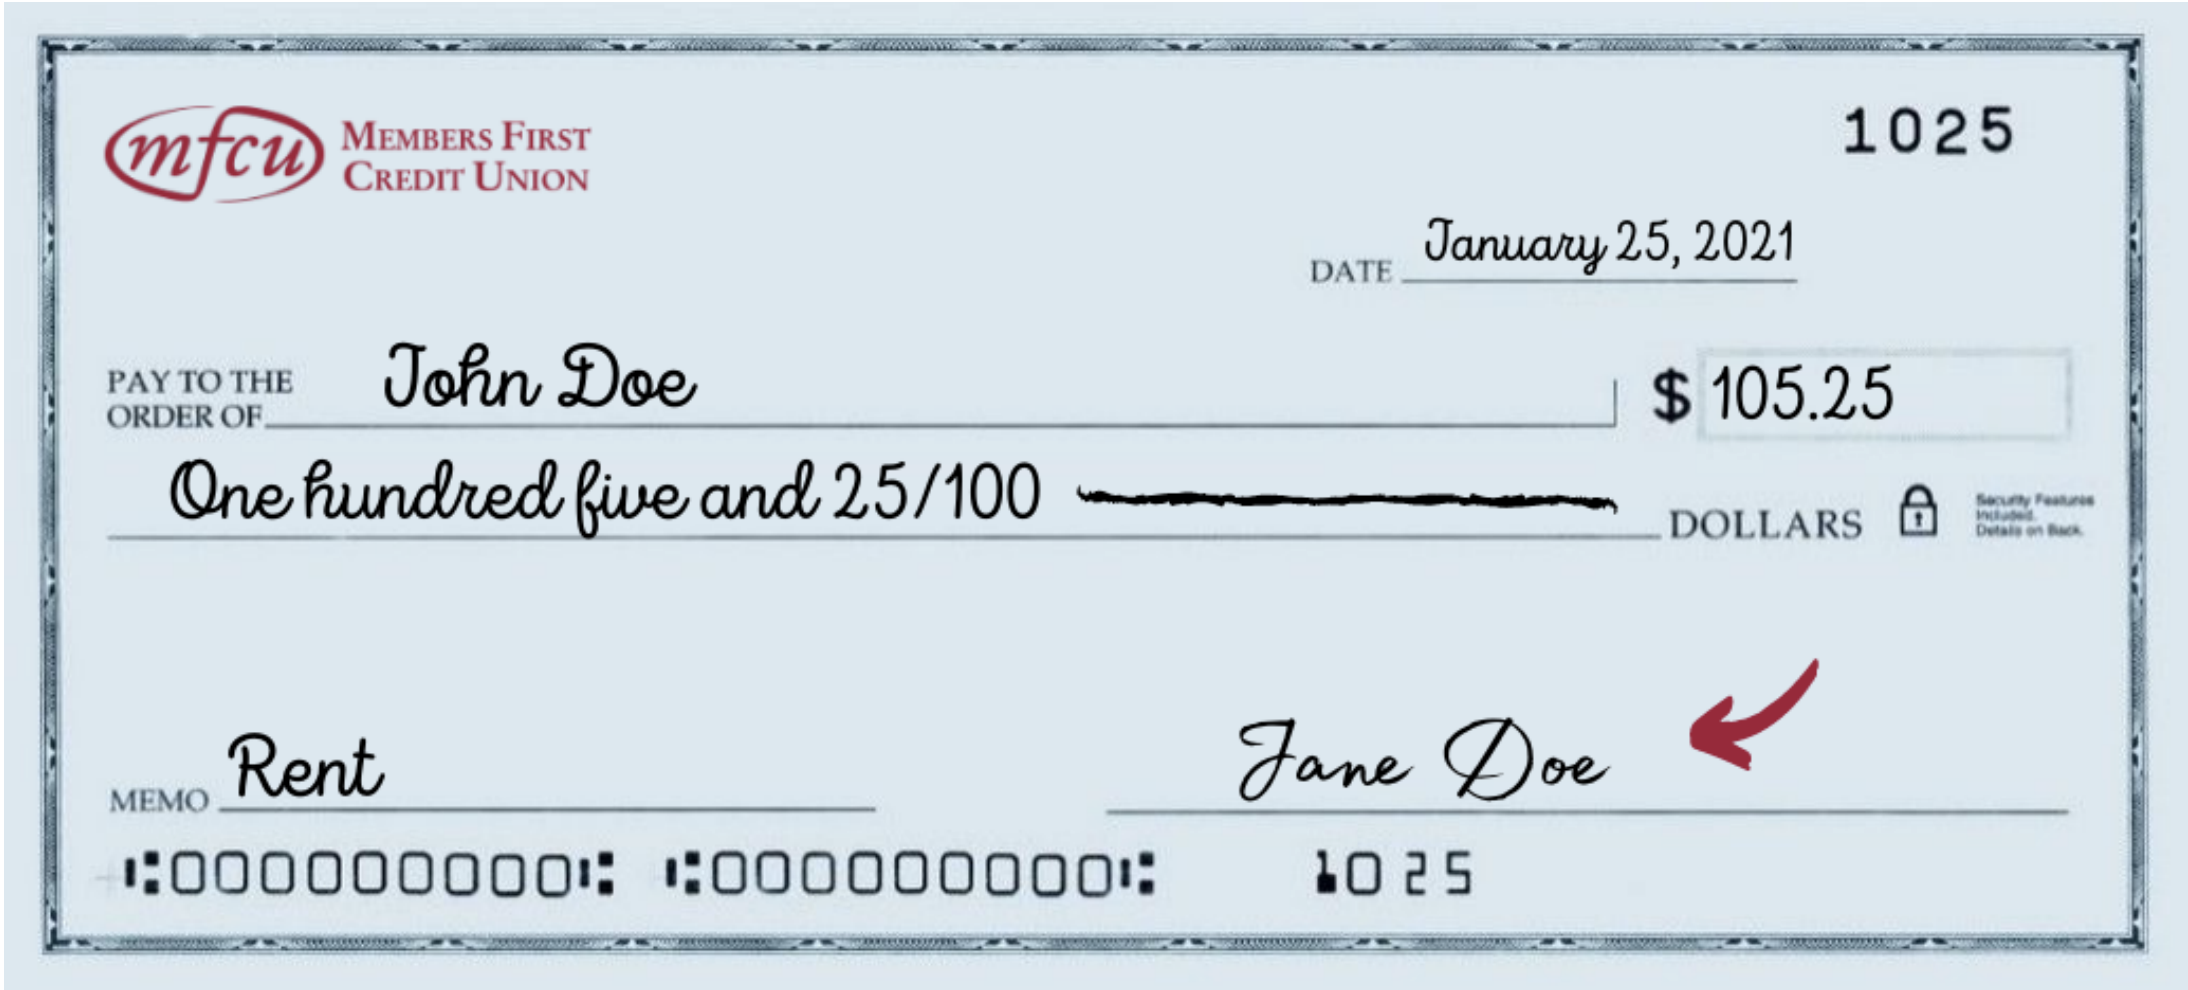 How to Write a Check - Members First Credit Union